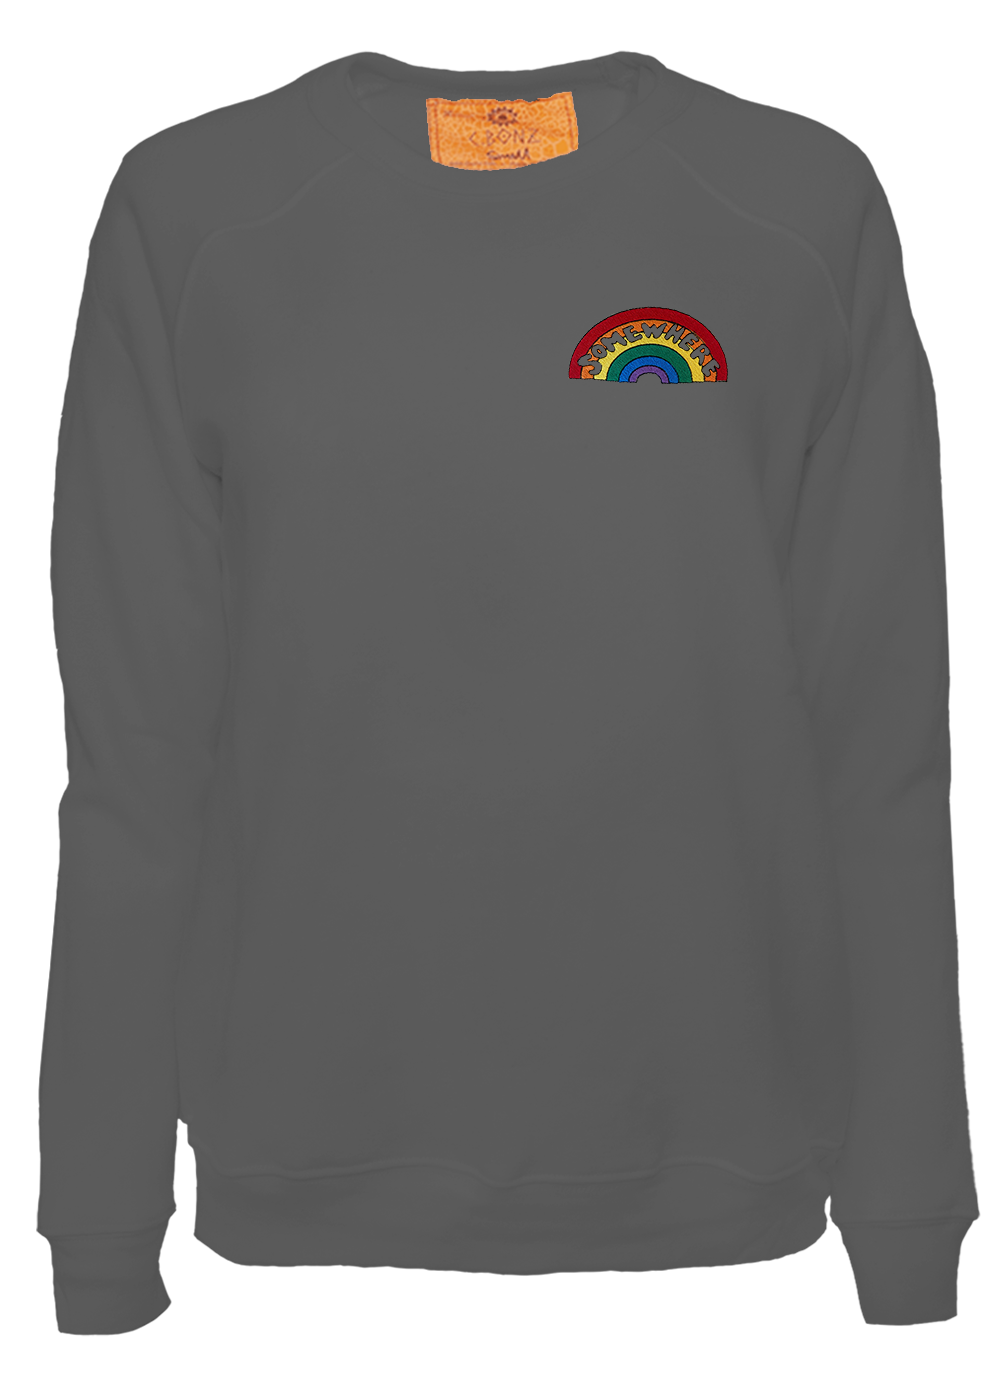 SOMEWHERE in the Rainbow Women's Classic Crew Pullover